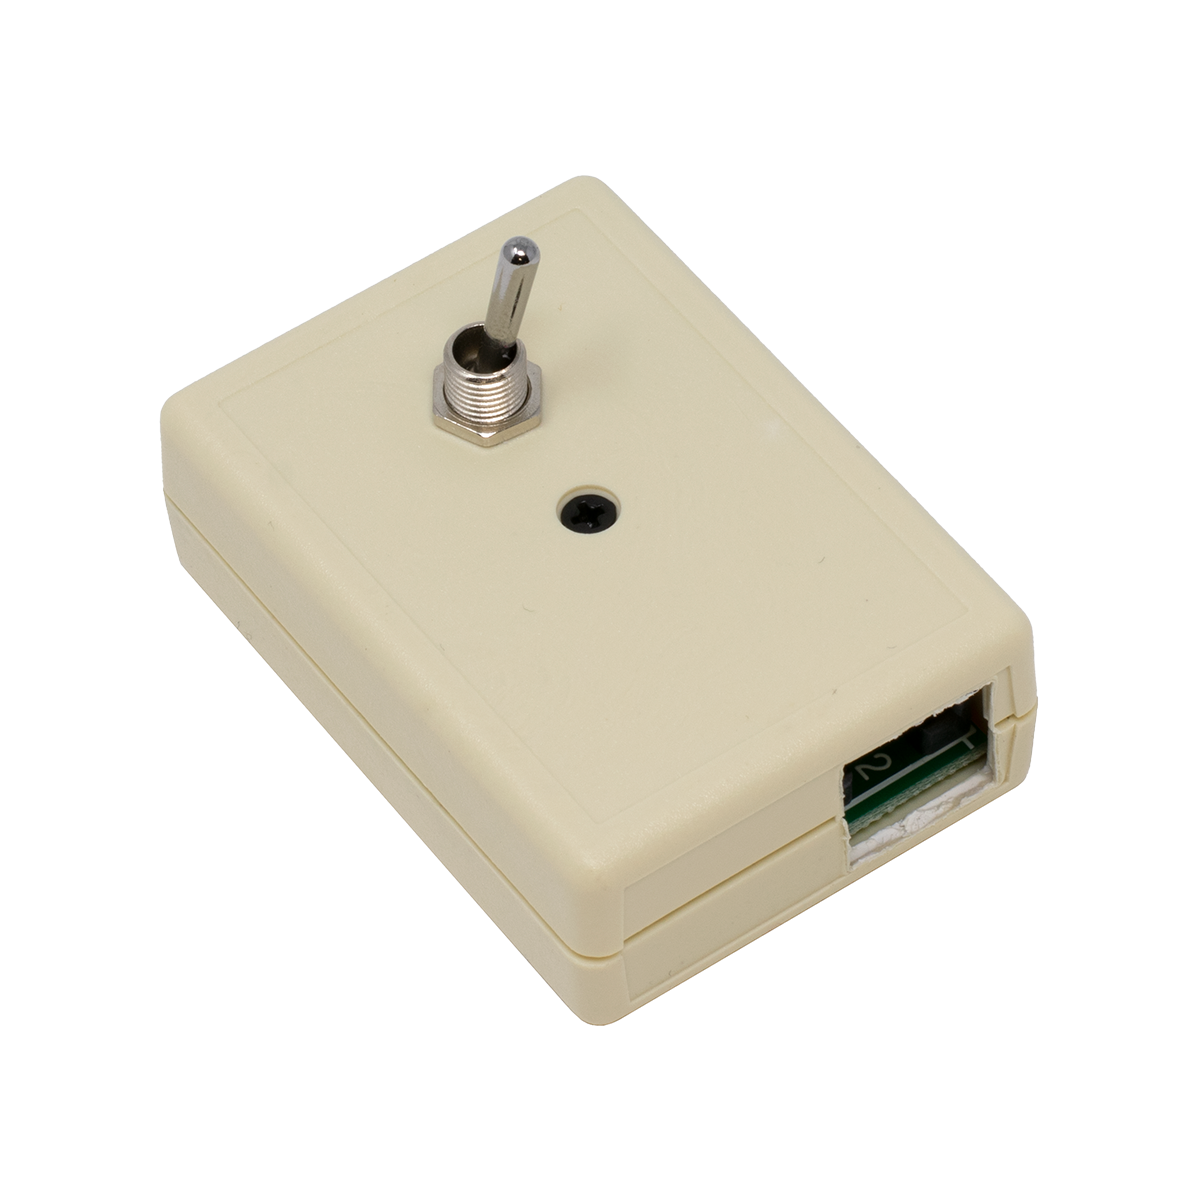 TKM-6 Modular 8-Pin Switch Top Mount Ivory (Top View)